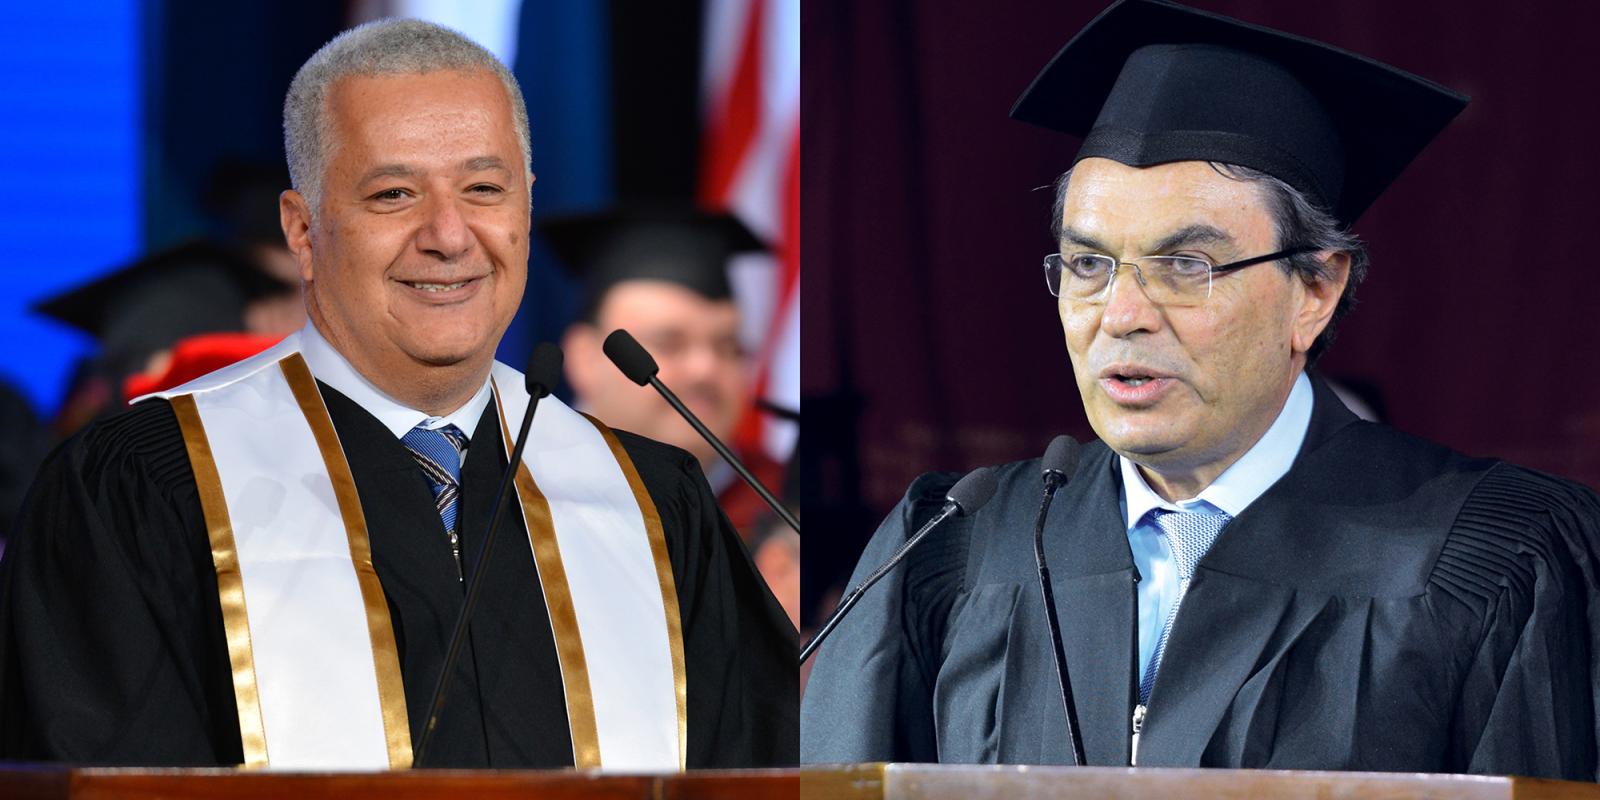 Ali Faramawy and Ayman Asfari were this year's midyear commencement speakers